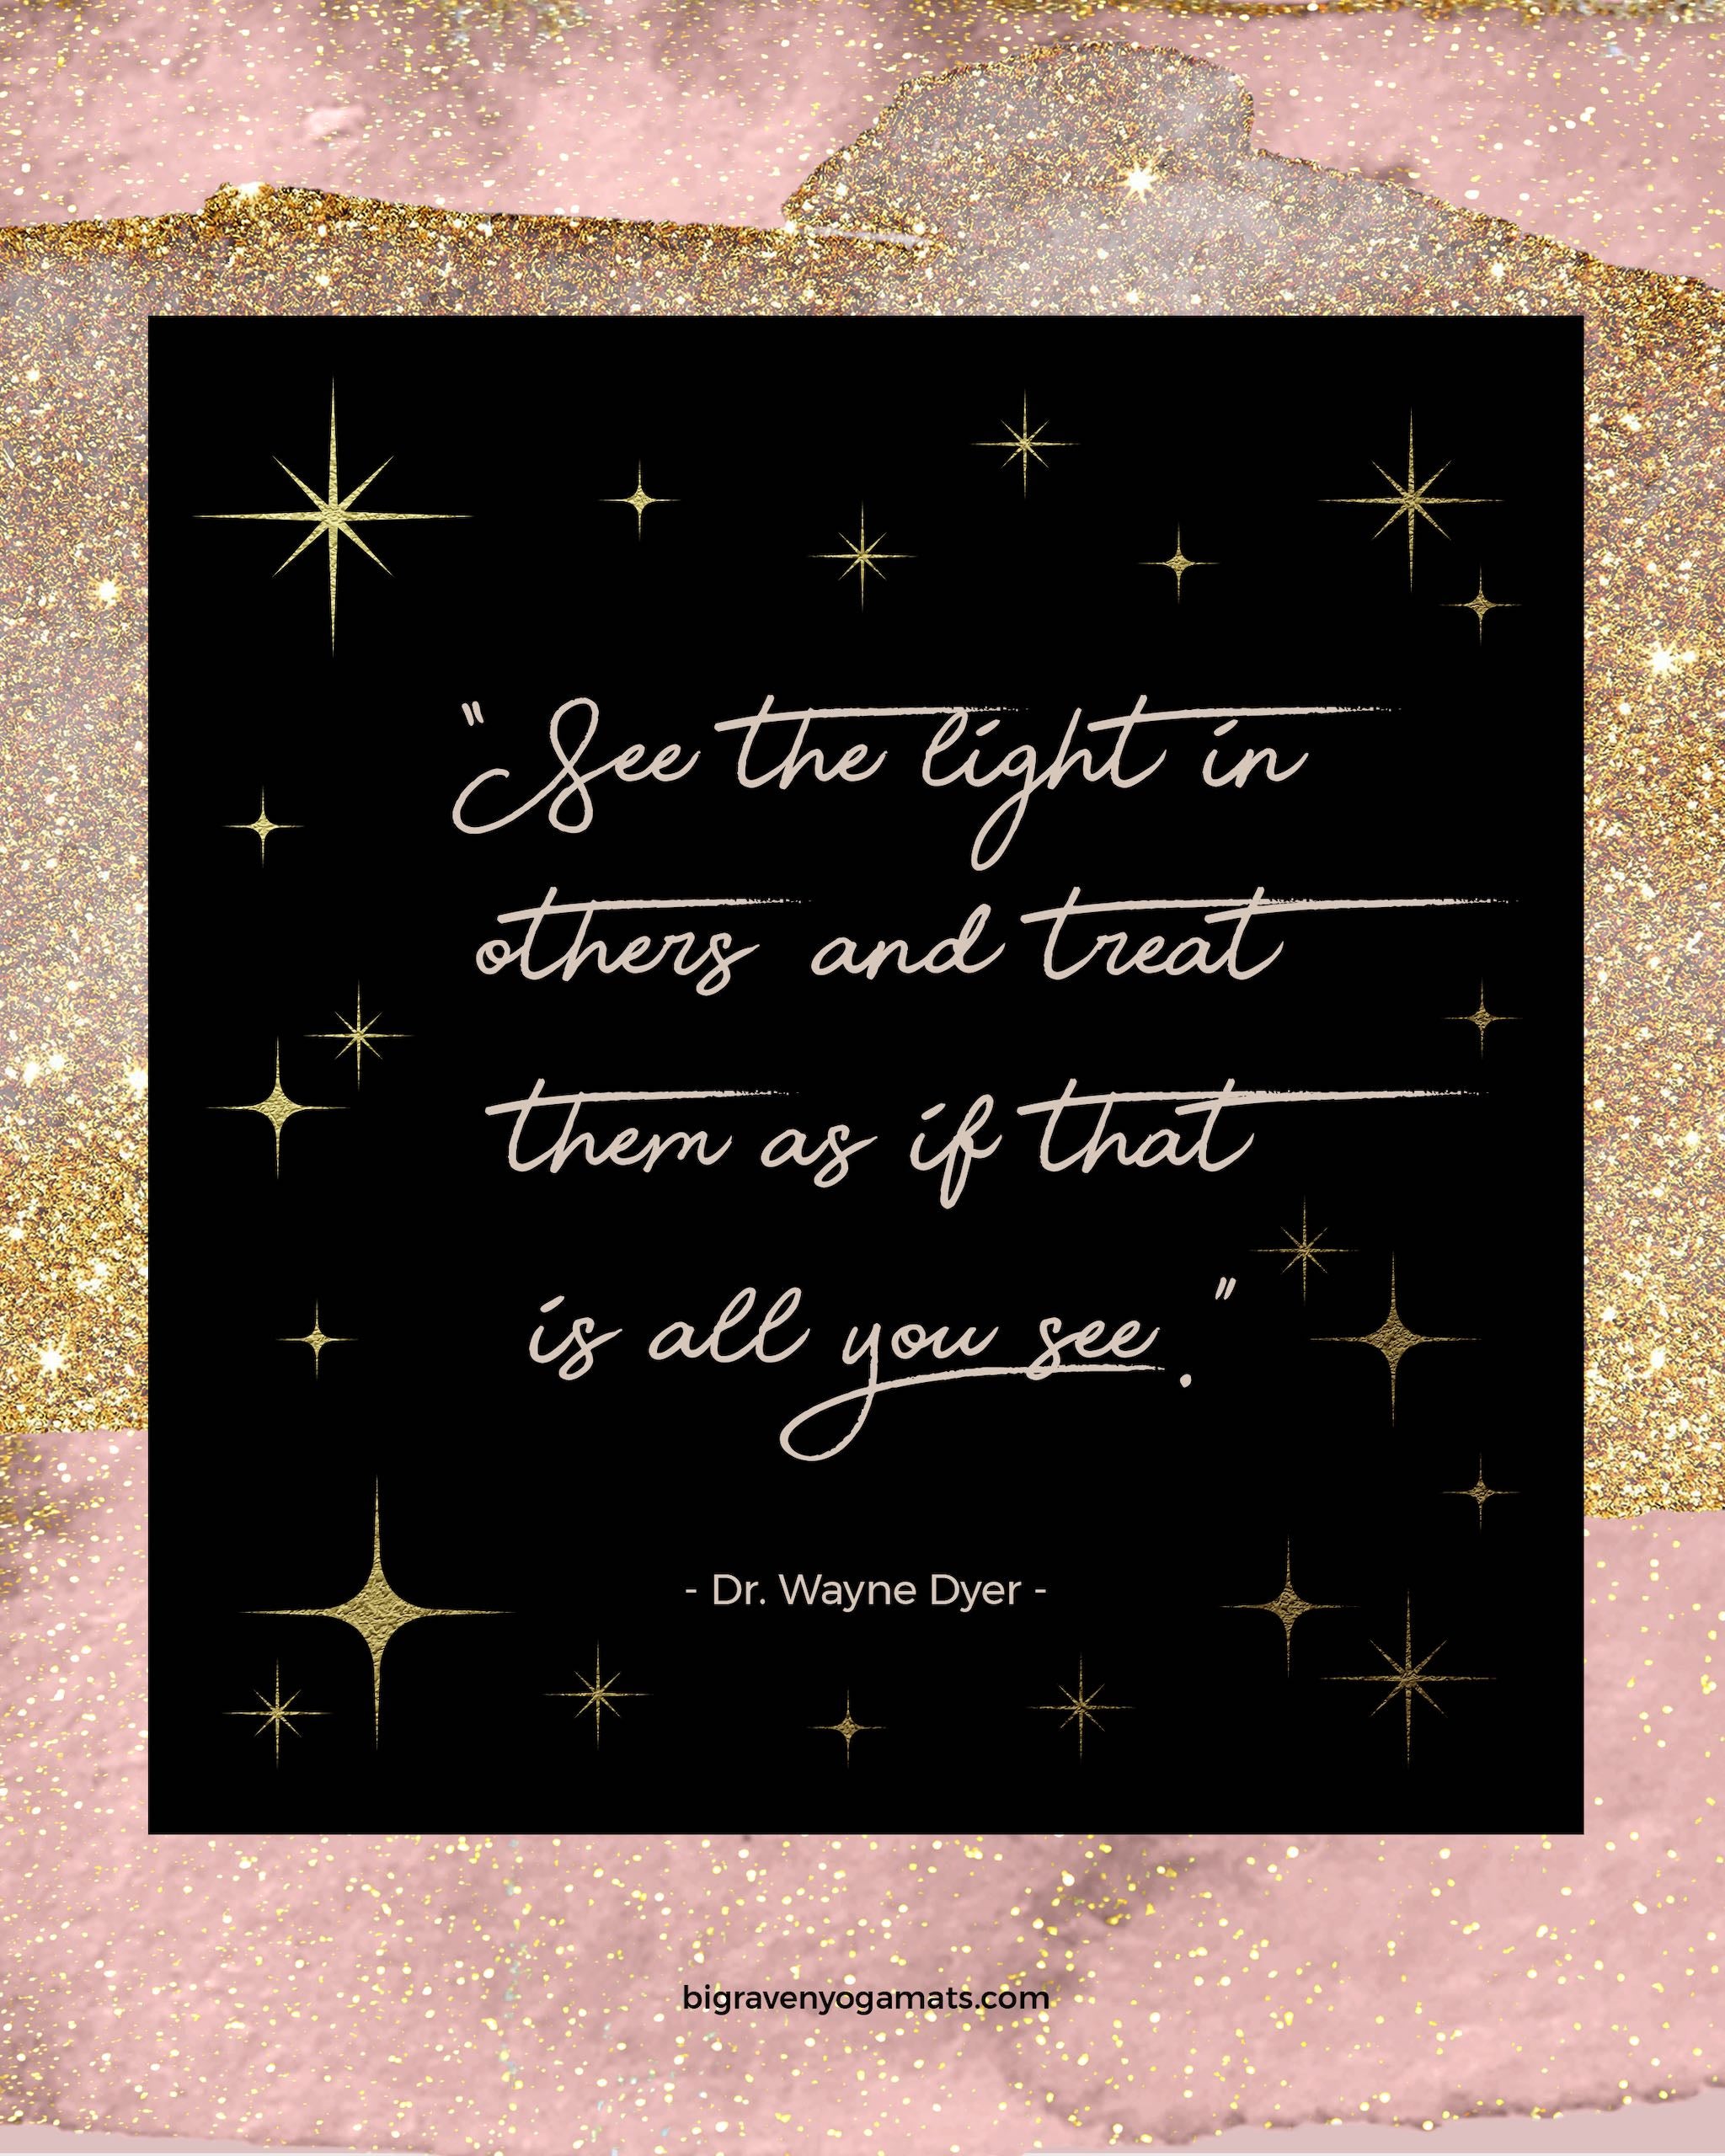 Quote: See the light in others, and treat them as if that is all you see. Dr. Wayne Dyer